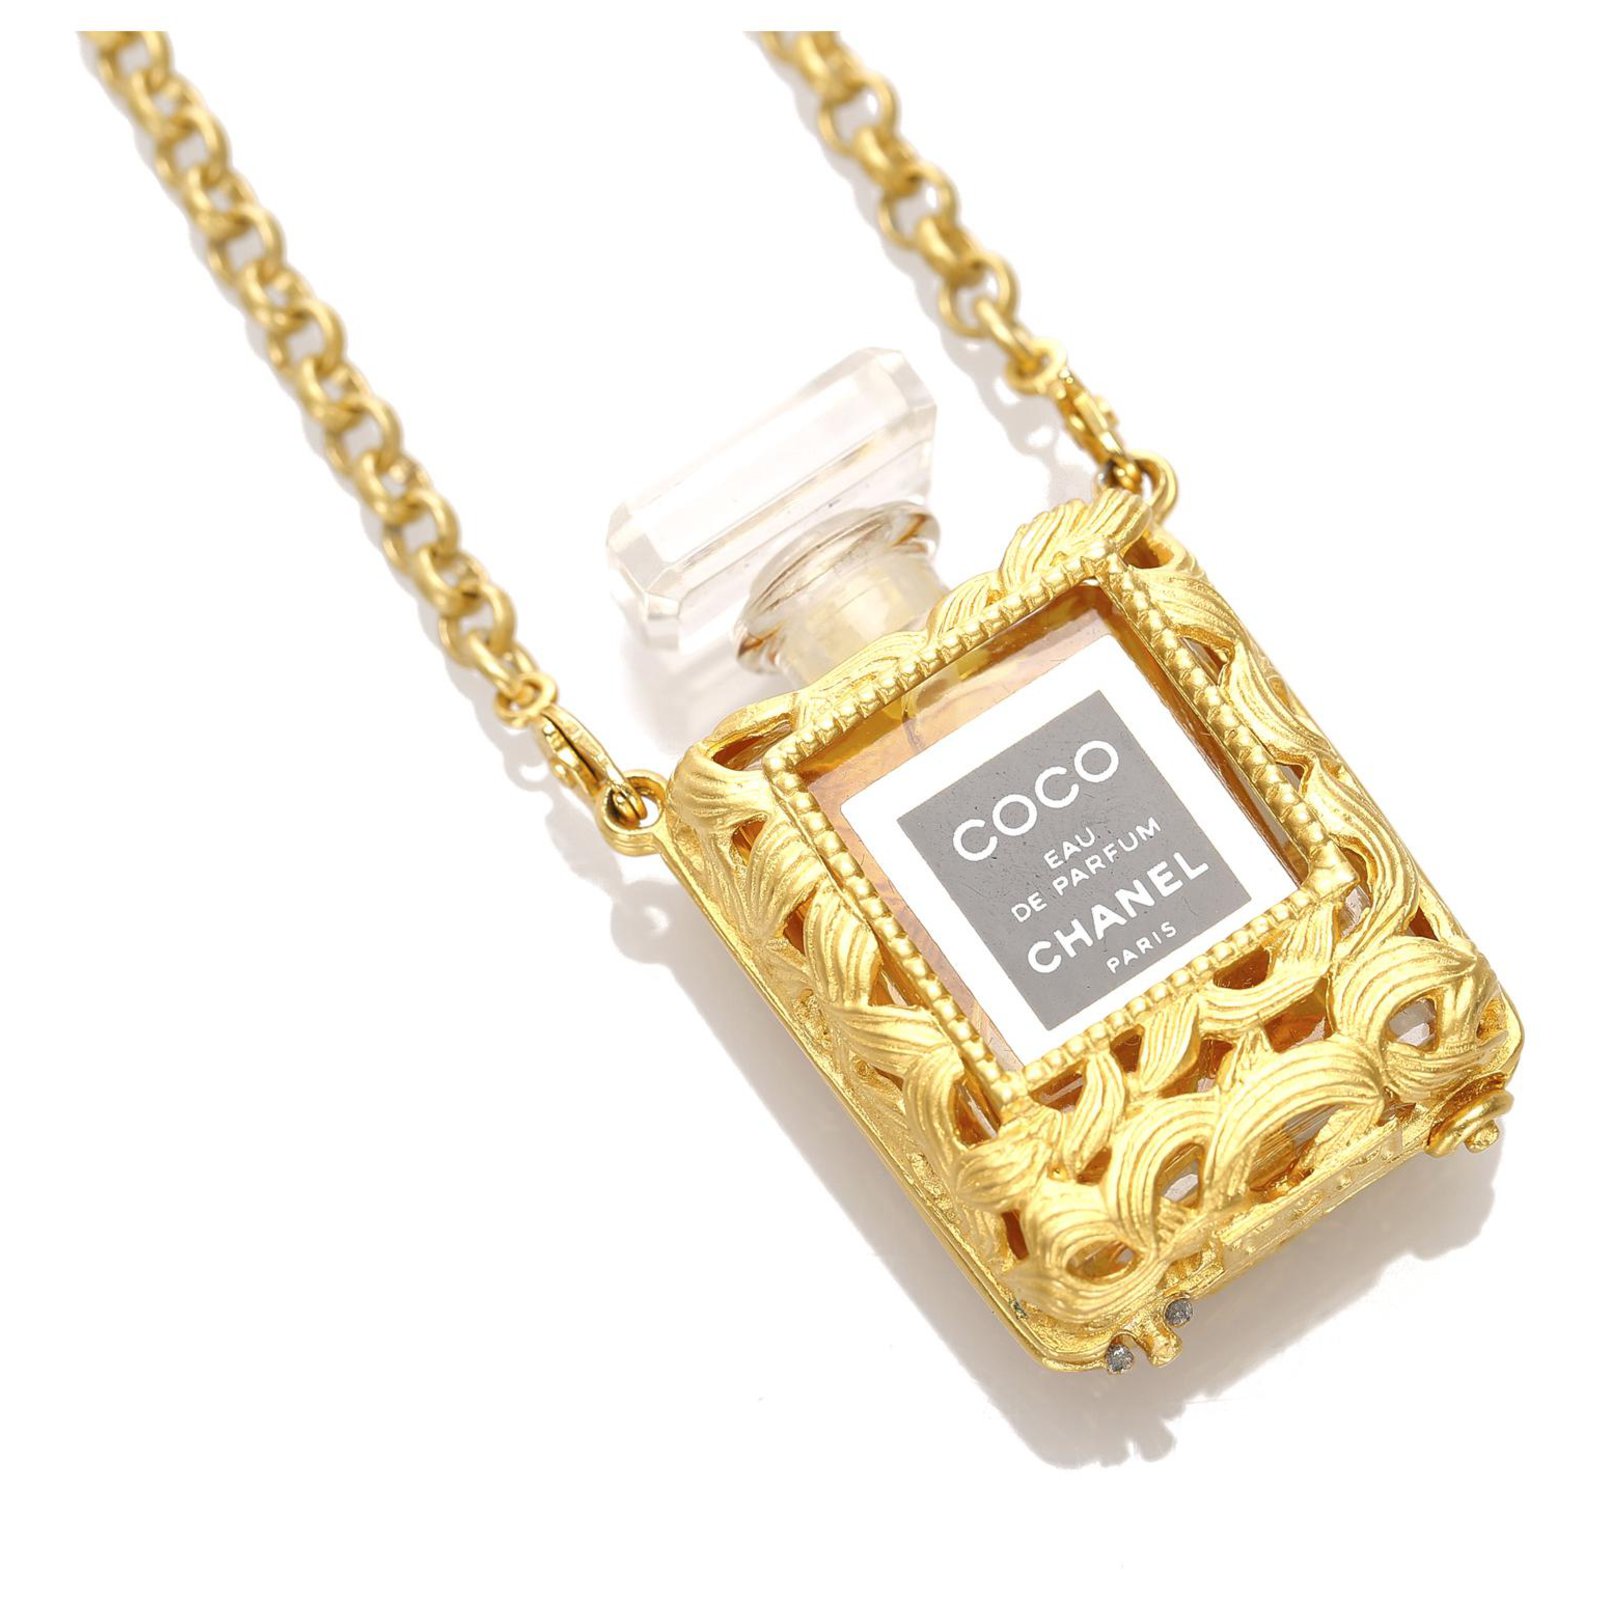 Chanel Gold Coco Perfume Bottle Necklace